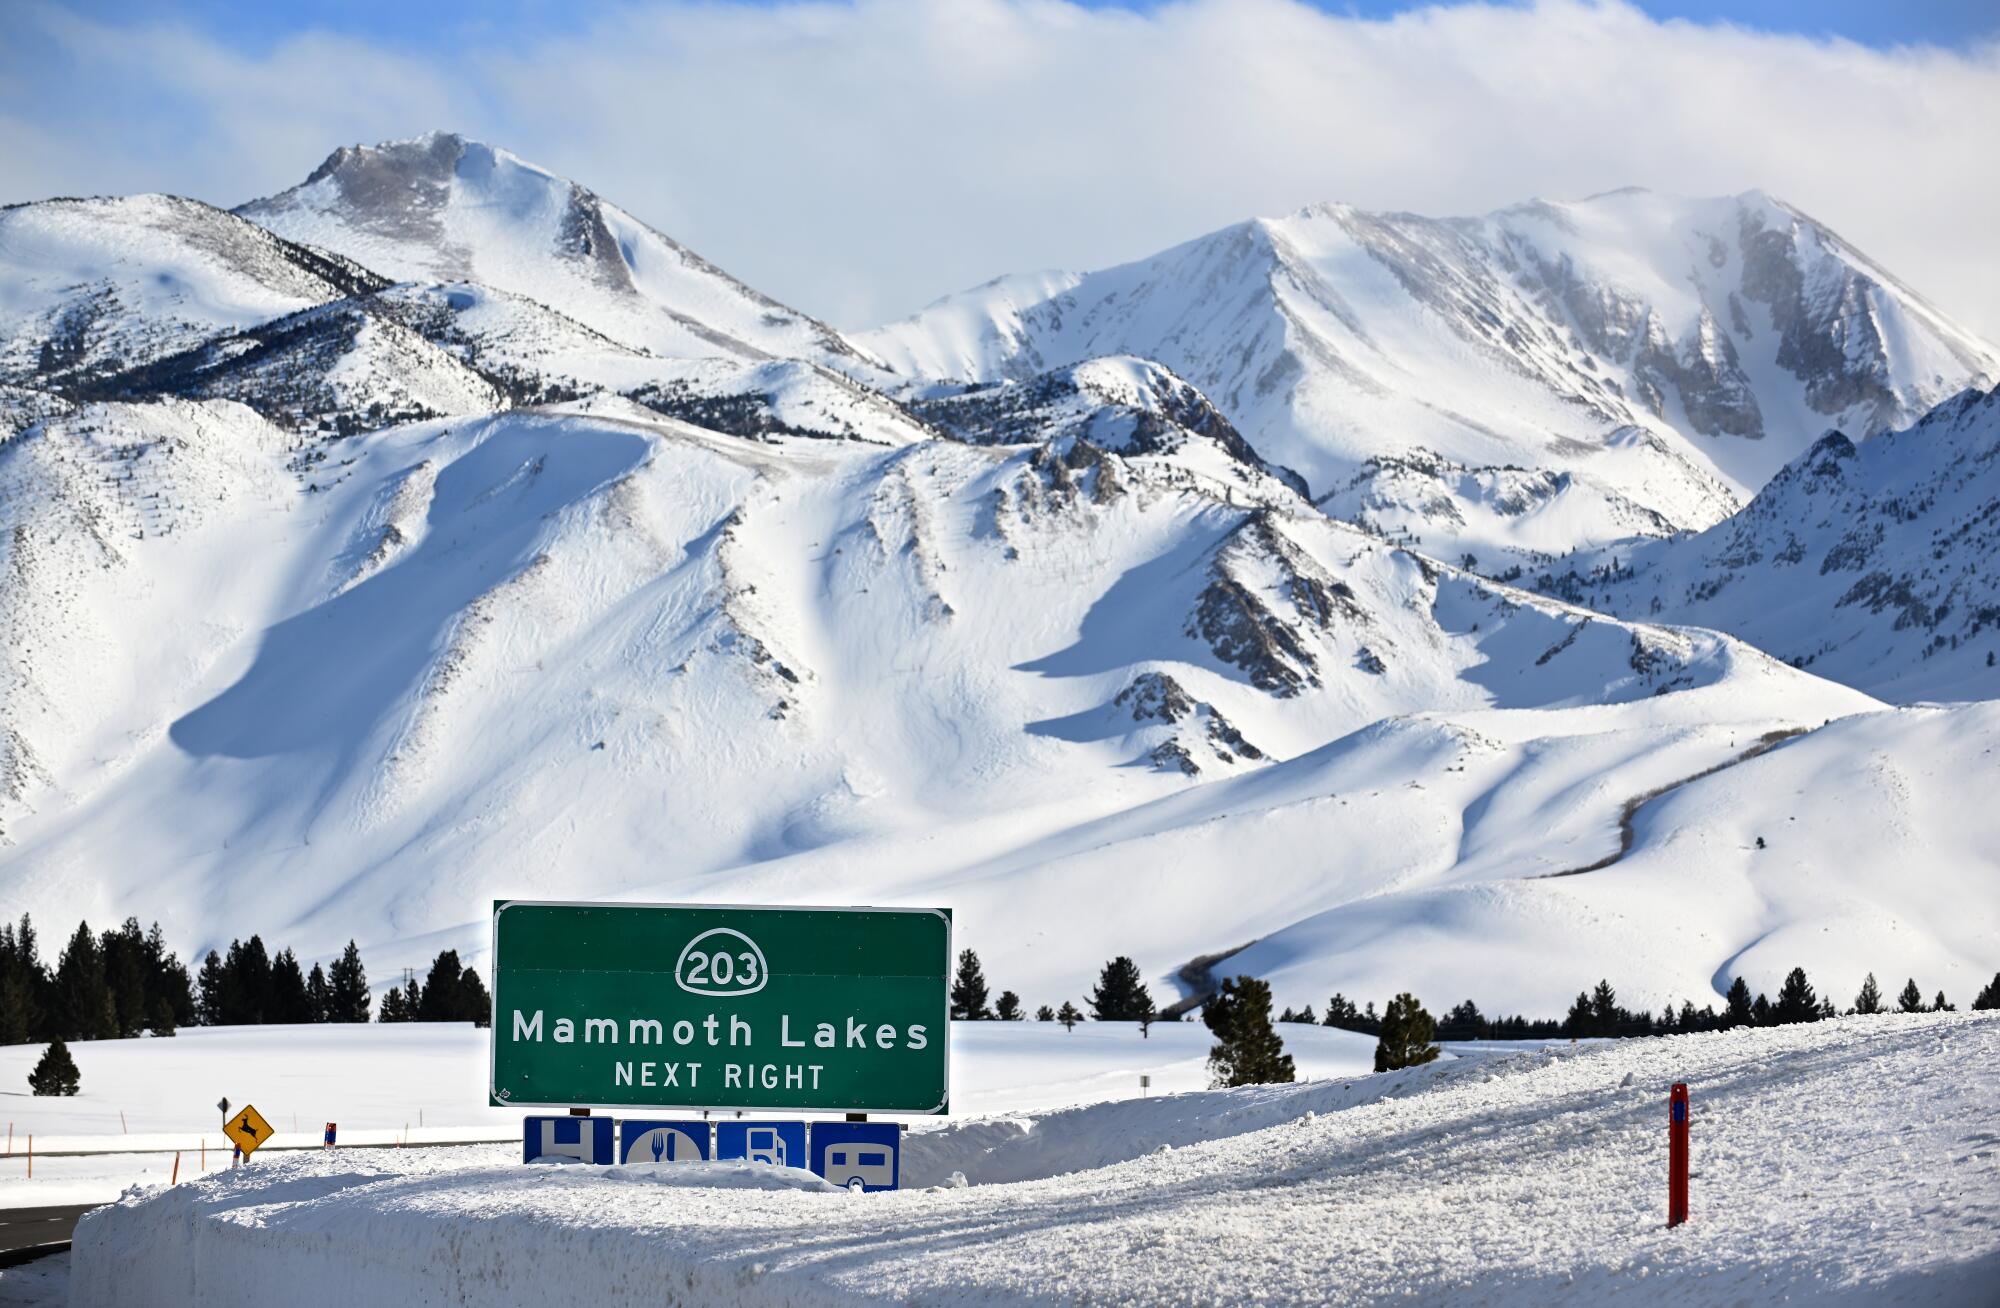 The Sierra Nevada mountains around Mammoth are caked with snow.